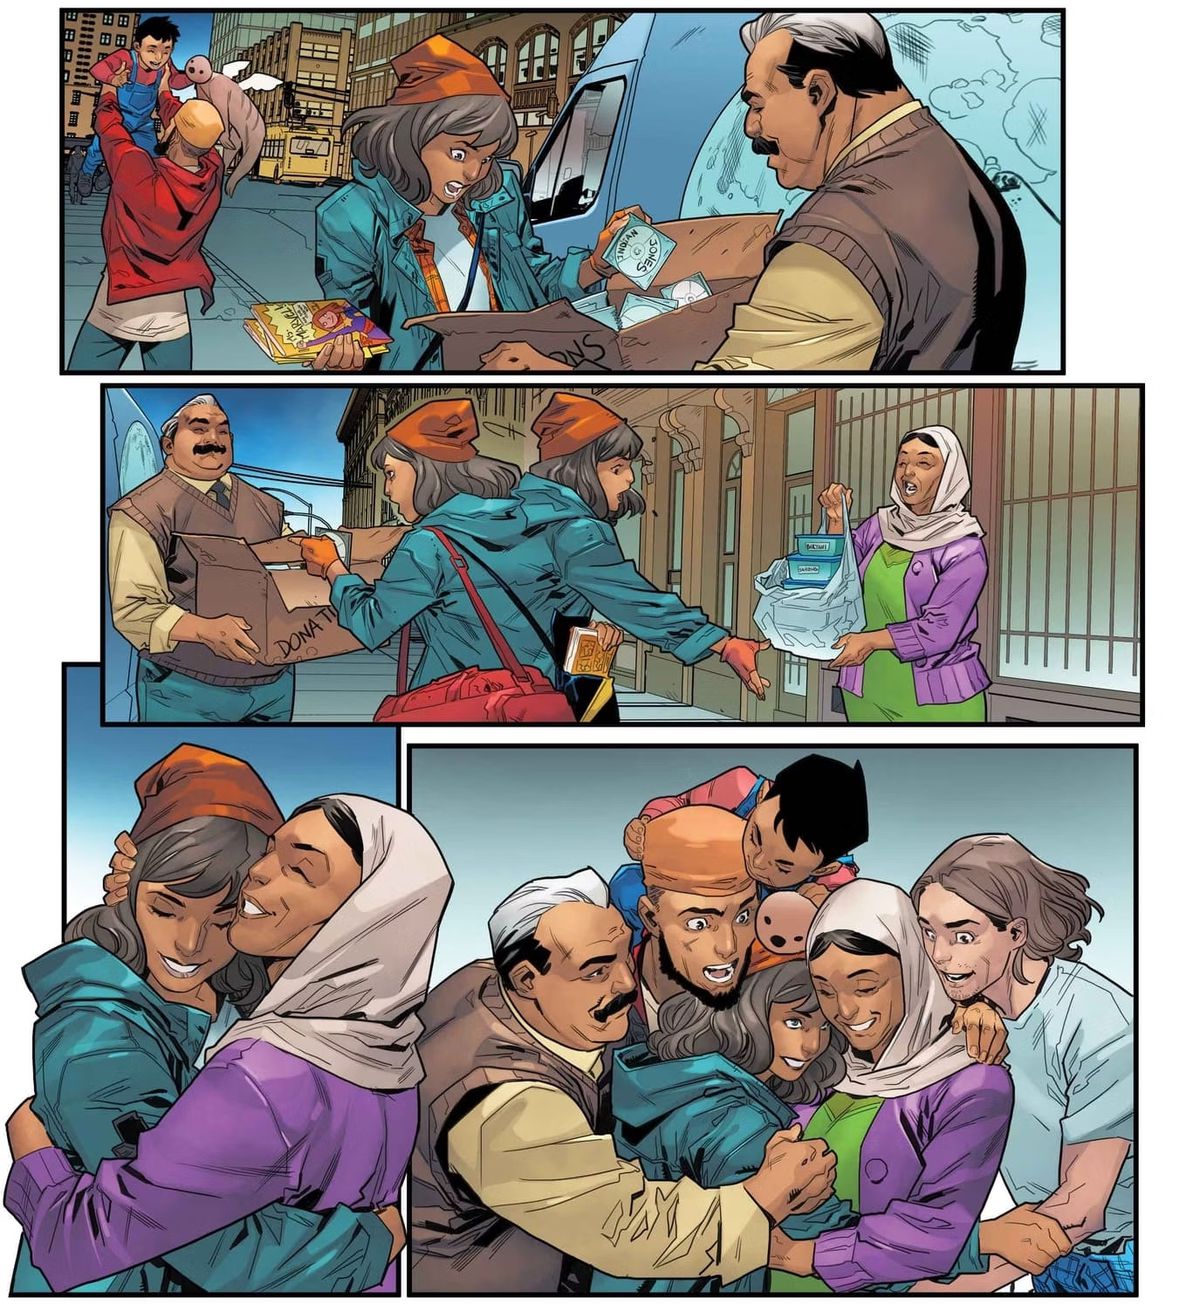 An unlettered page from Ms. Marvel: The New Mutant #1, feature panels of Kamala’s family (and Bruno) happily handing her boxes and bags of donated food and doing a big group hug. 